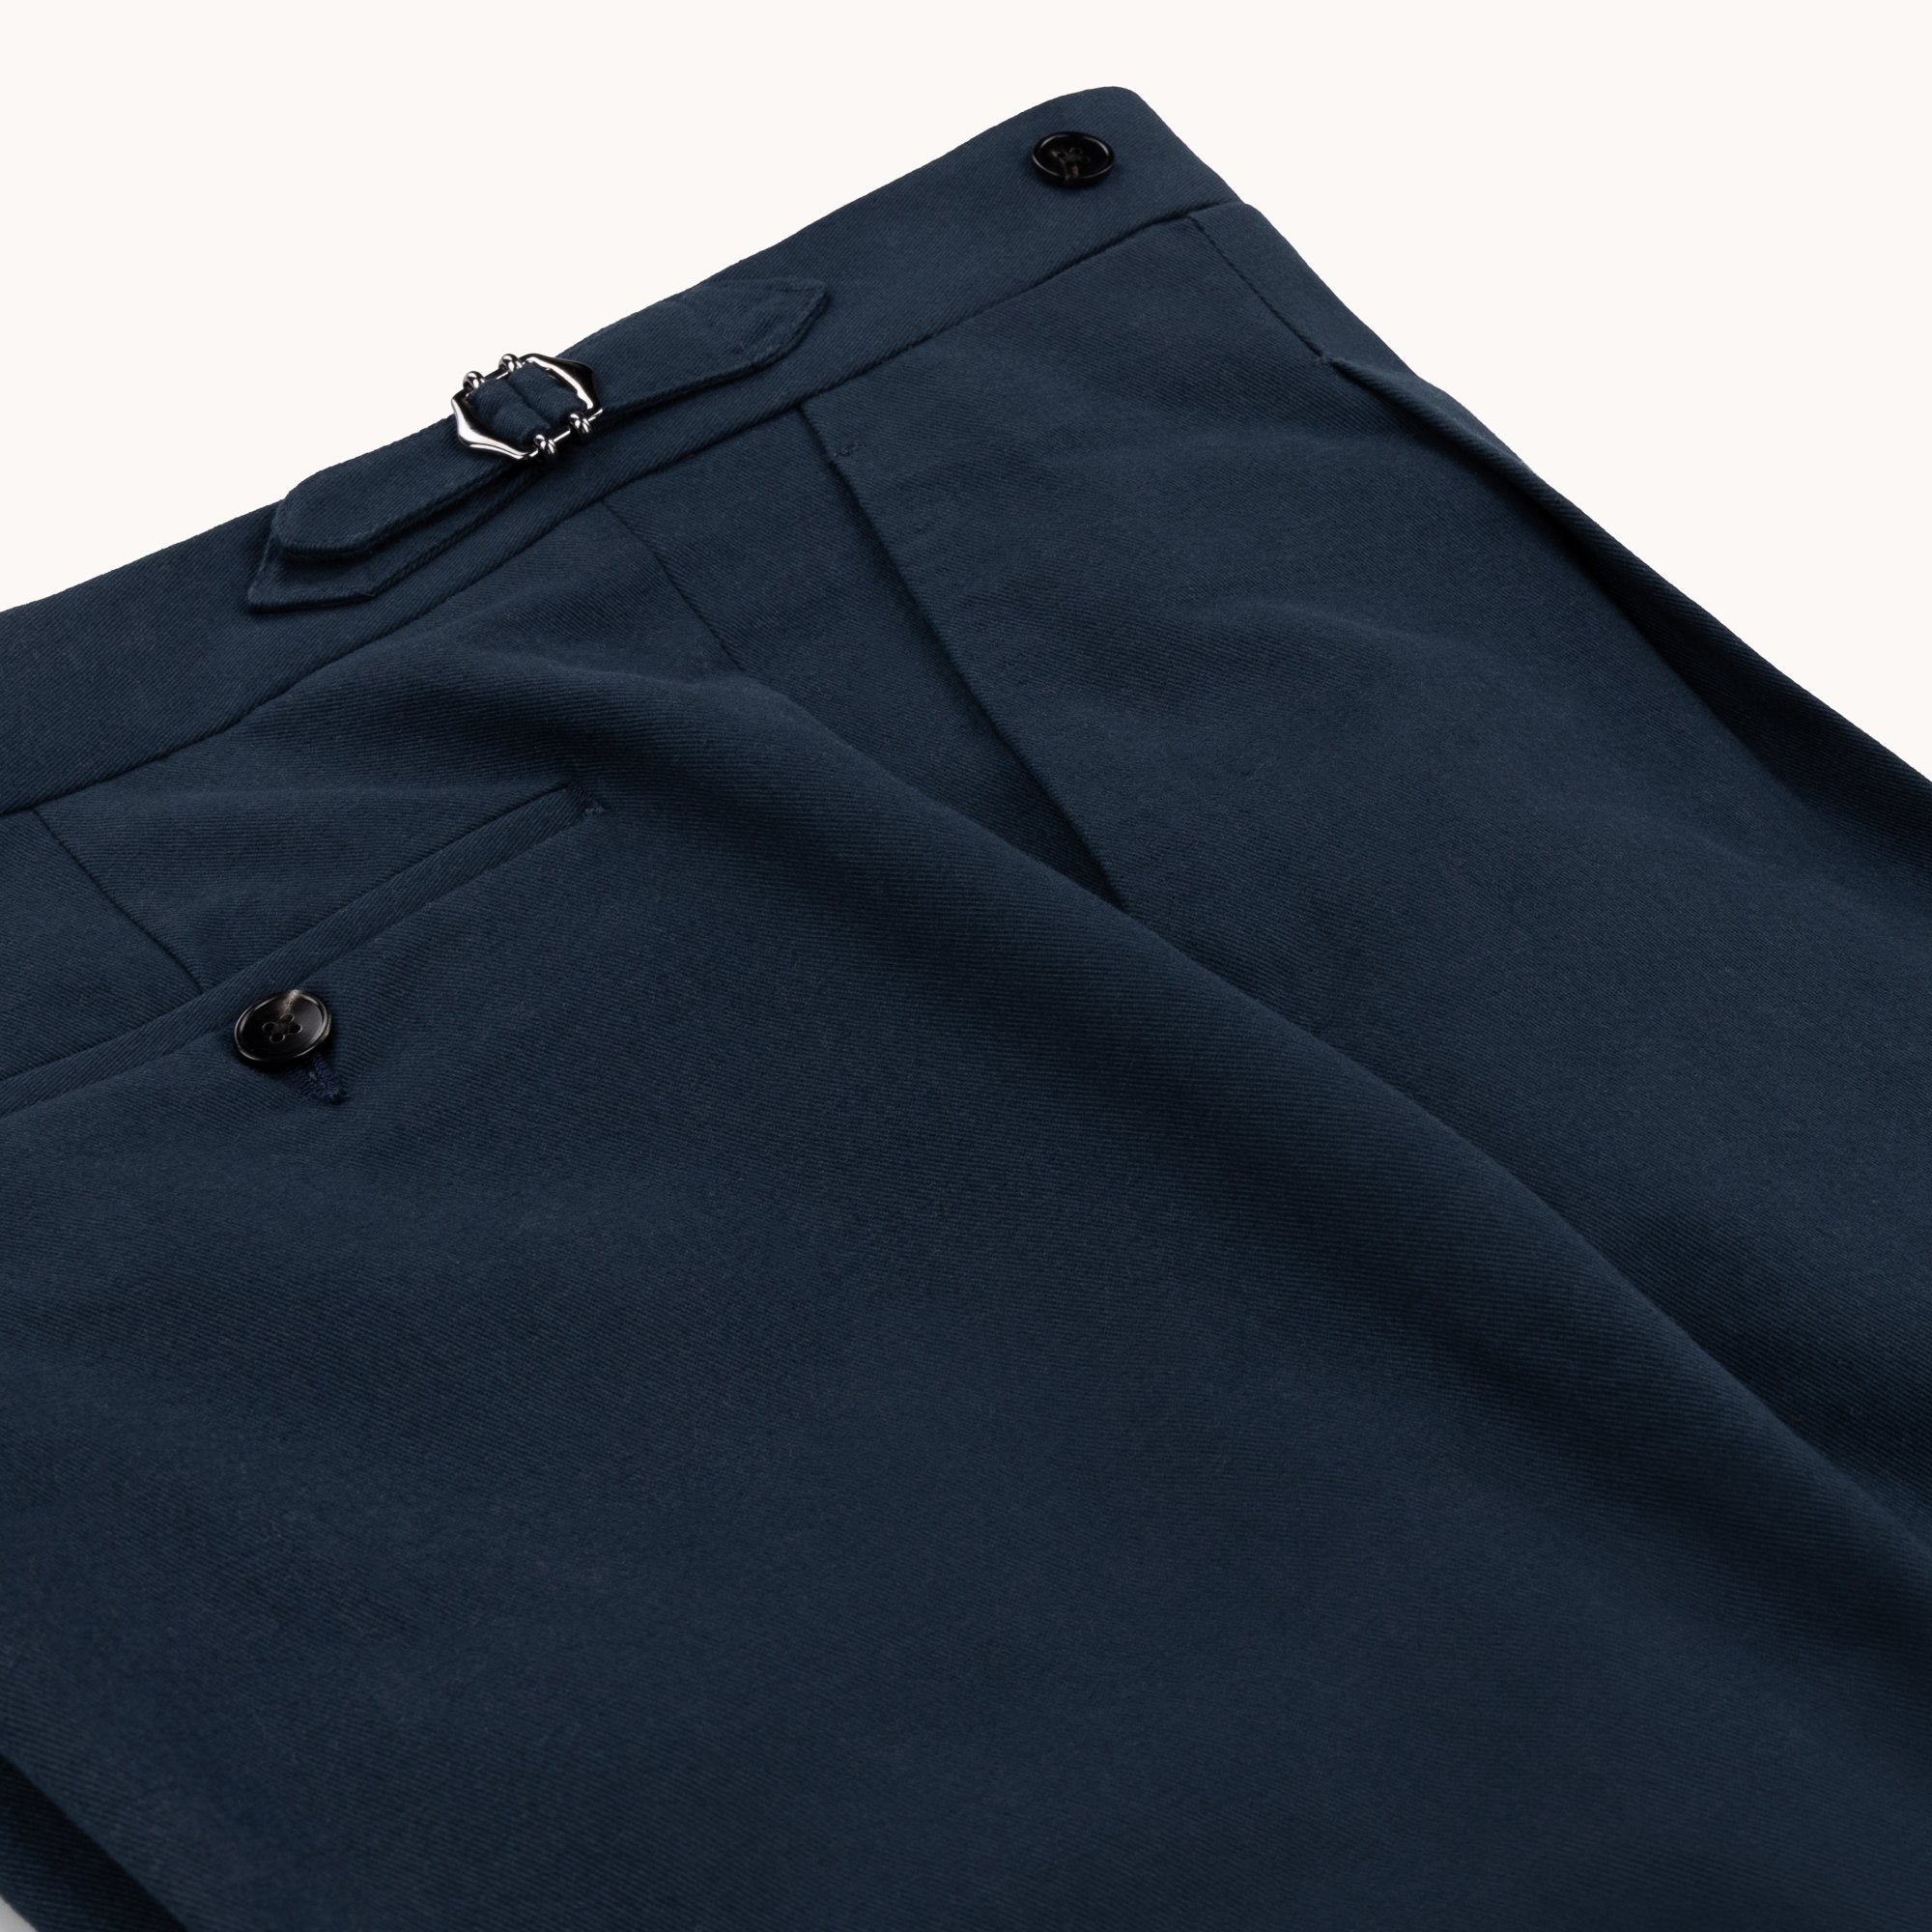 Single Pleat Trouser - Navy Brushed Cotton